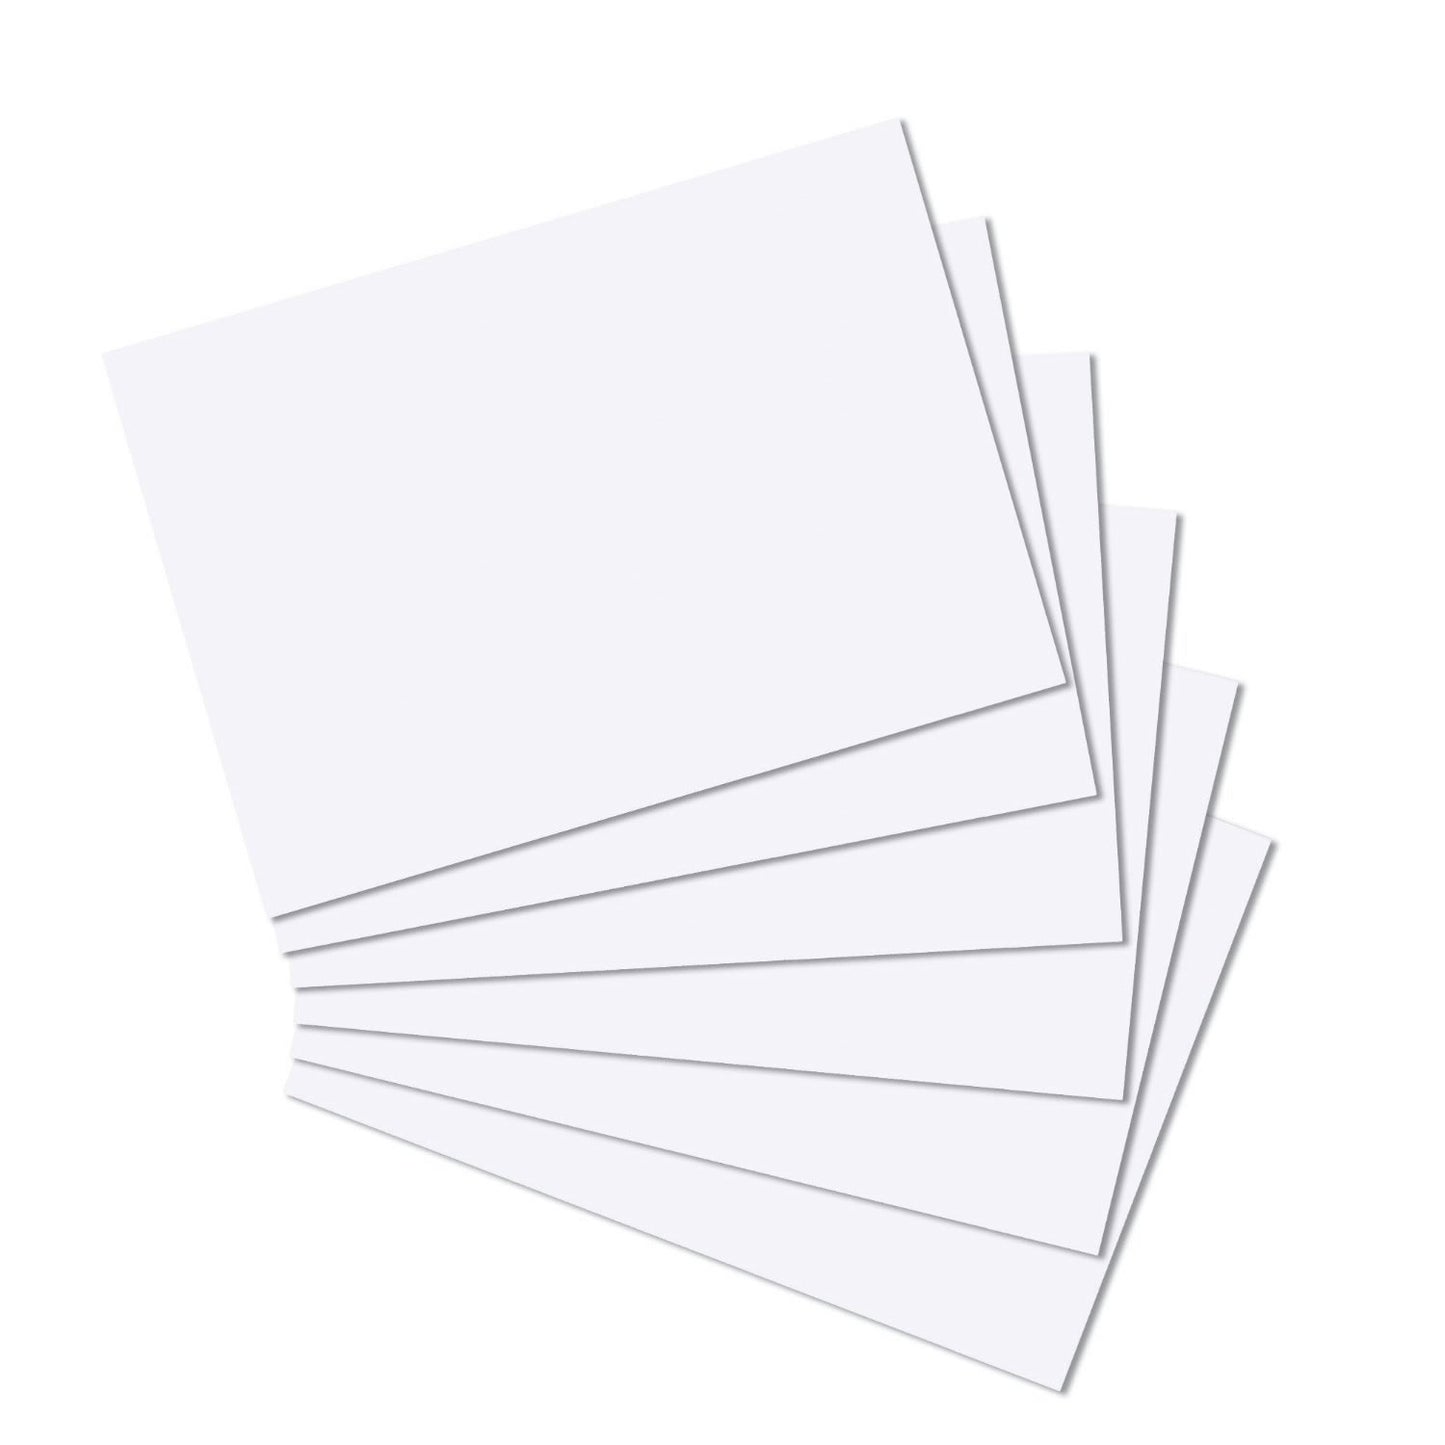 White card 224 gsm SRA2 125 Sheets